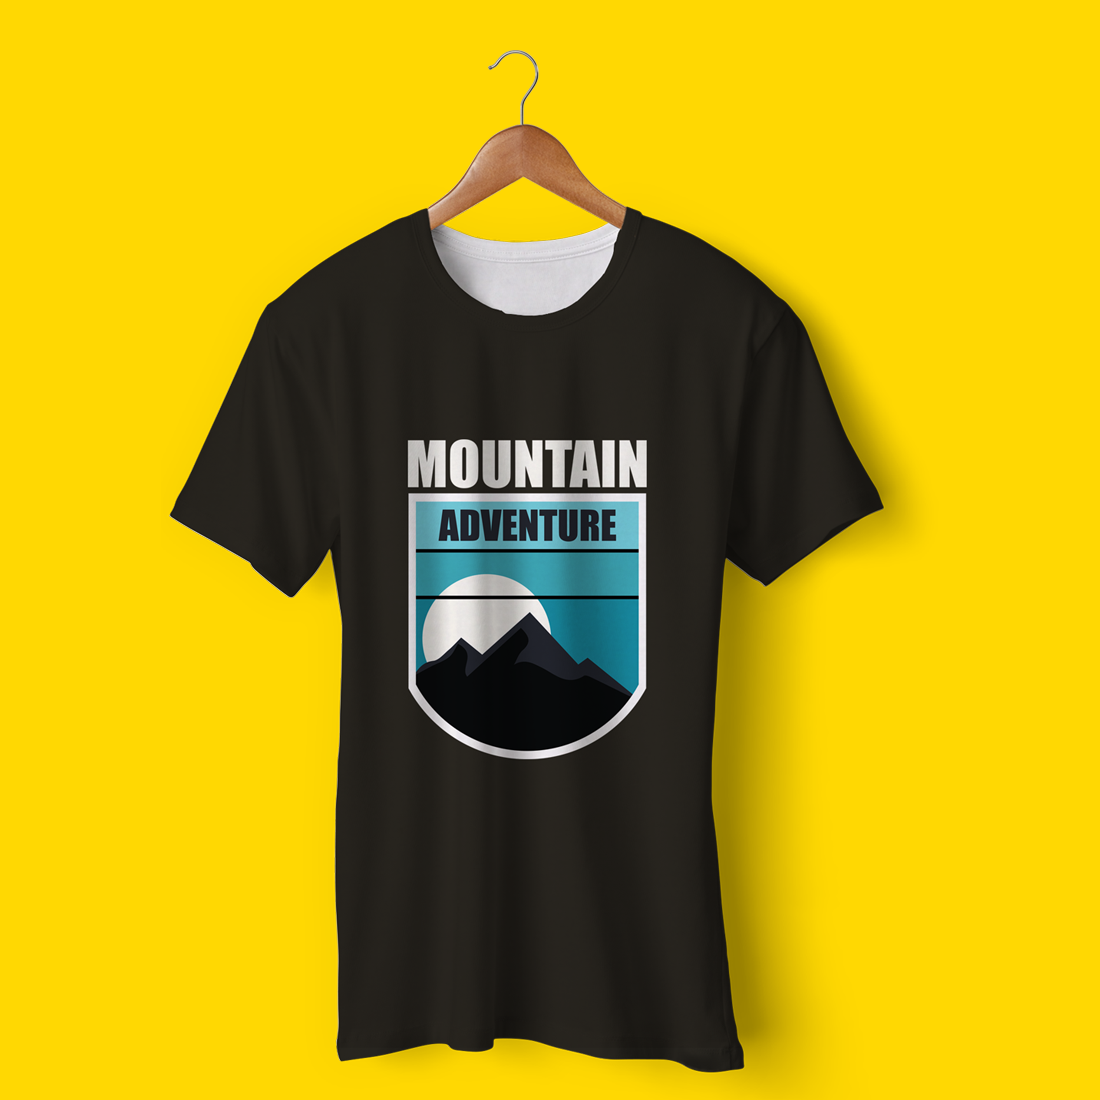 Black t - shirt that says mountain adventure on it.